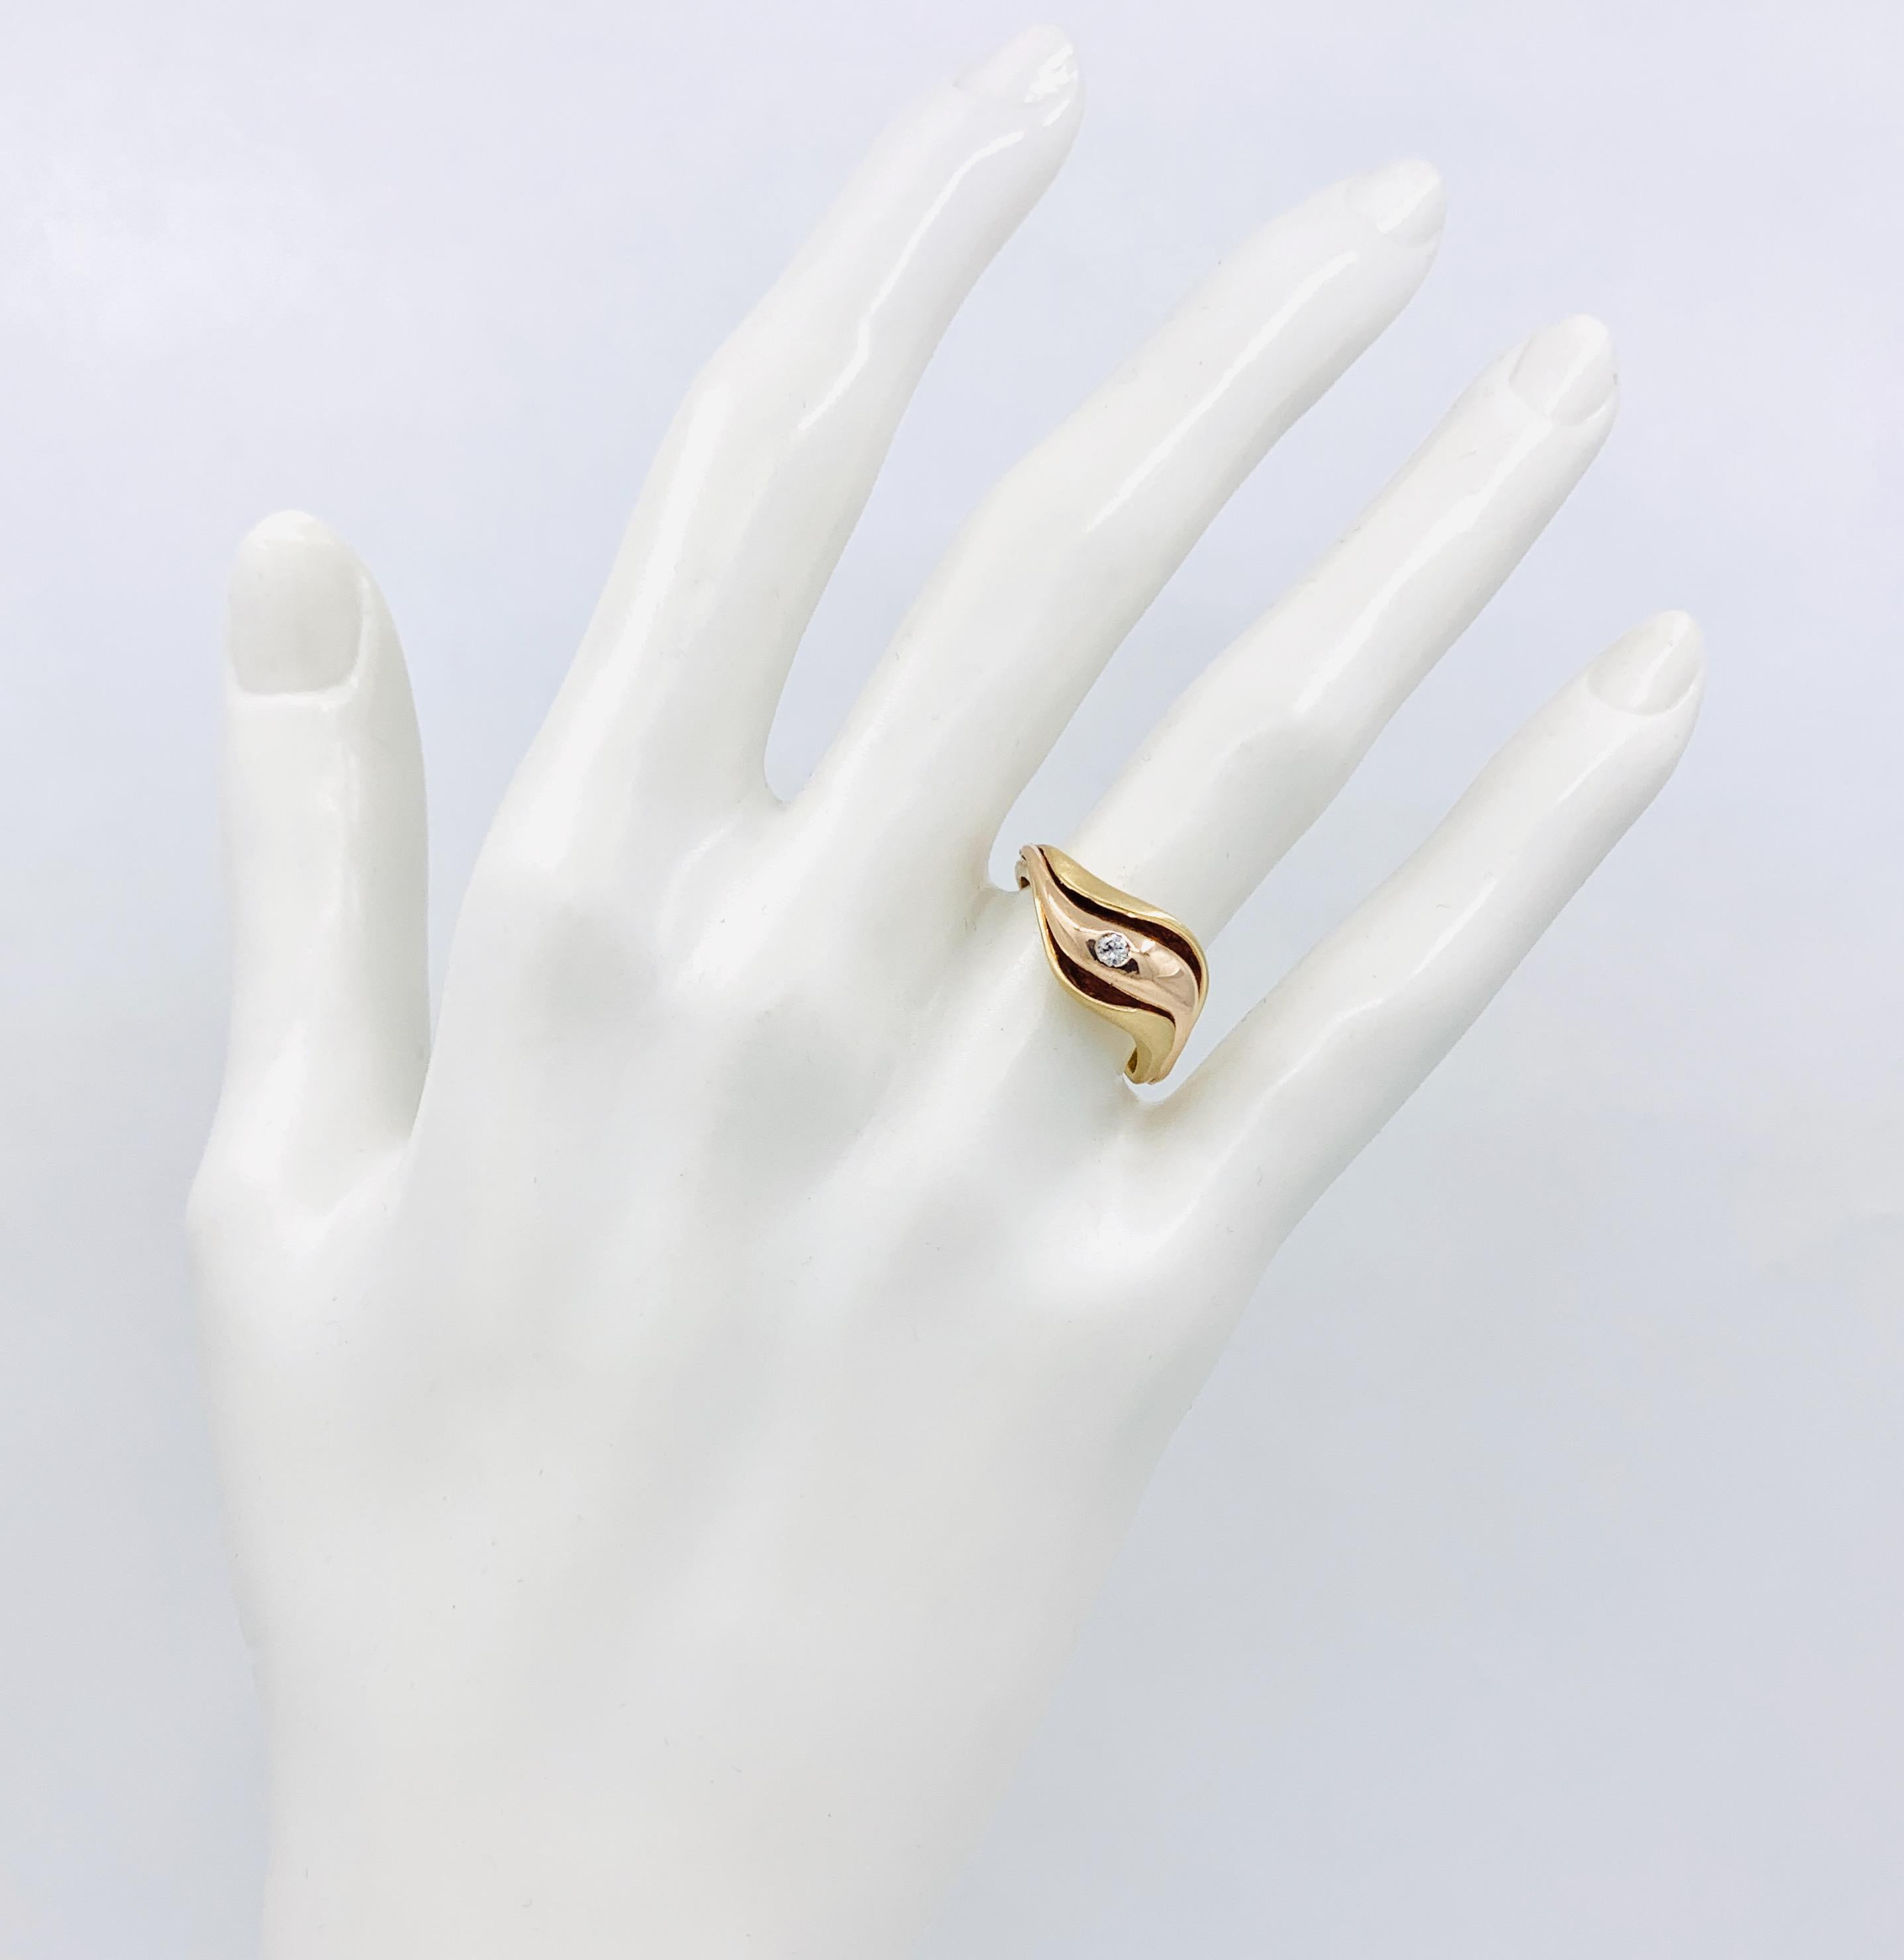 This gorgeous and sexy new one-of-a-kind ring by Eytan Brandes is a freeform swerve of satiny brushed yellow gold that gracefully opens in front to reveal a polished tendril of rose gold.  A 0.06 carat hammer-set diamond completes the look. 